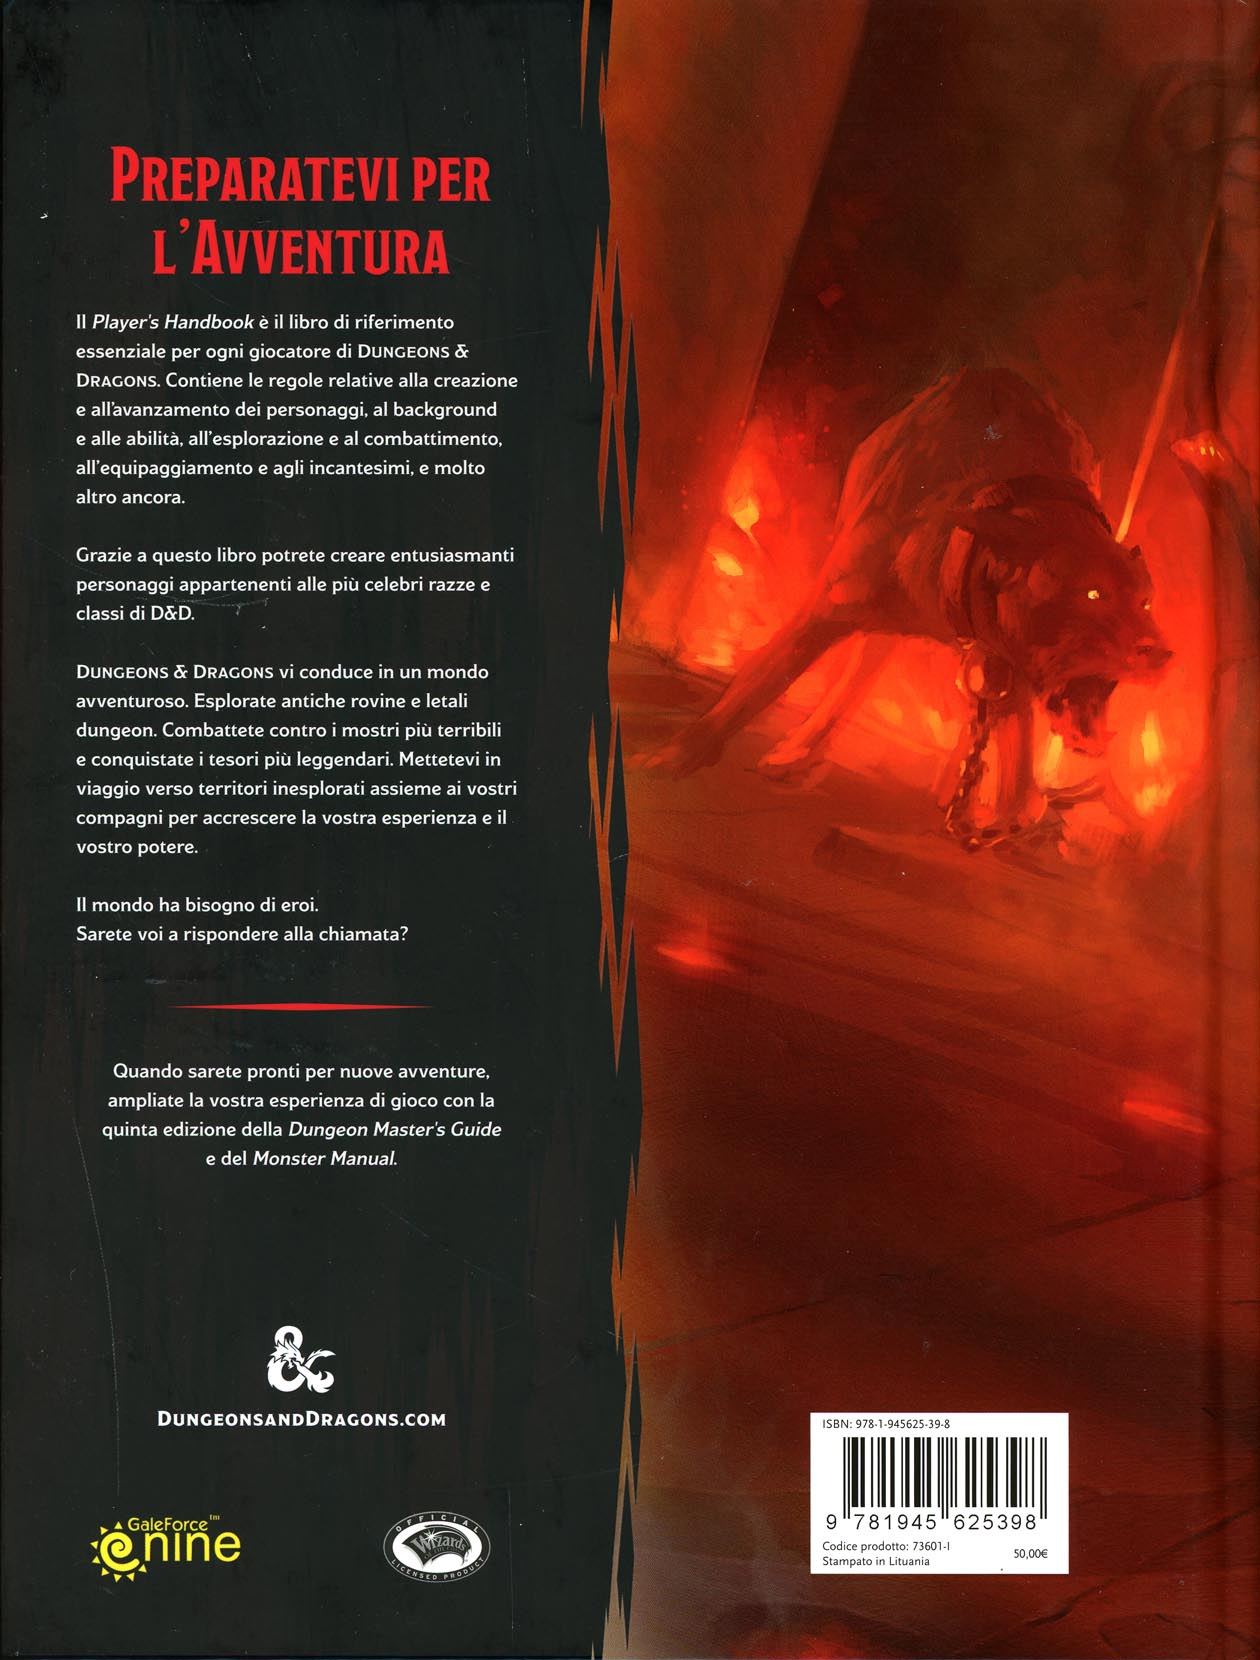 Italian Dungeons & Dragons Archive